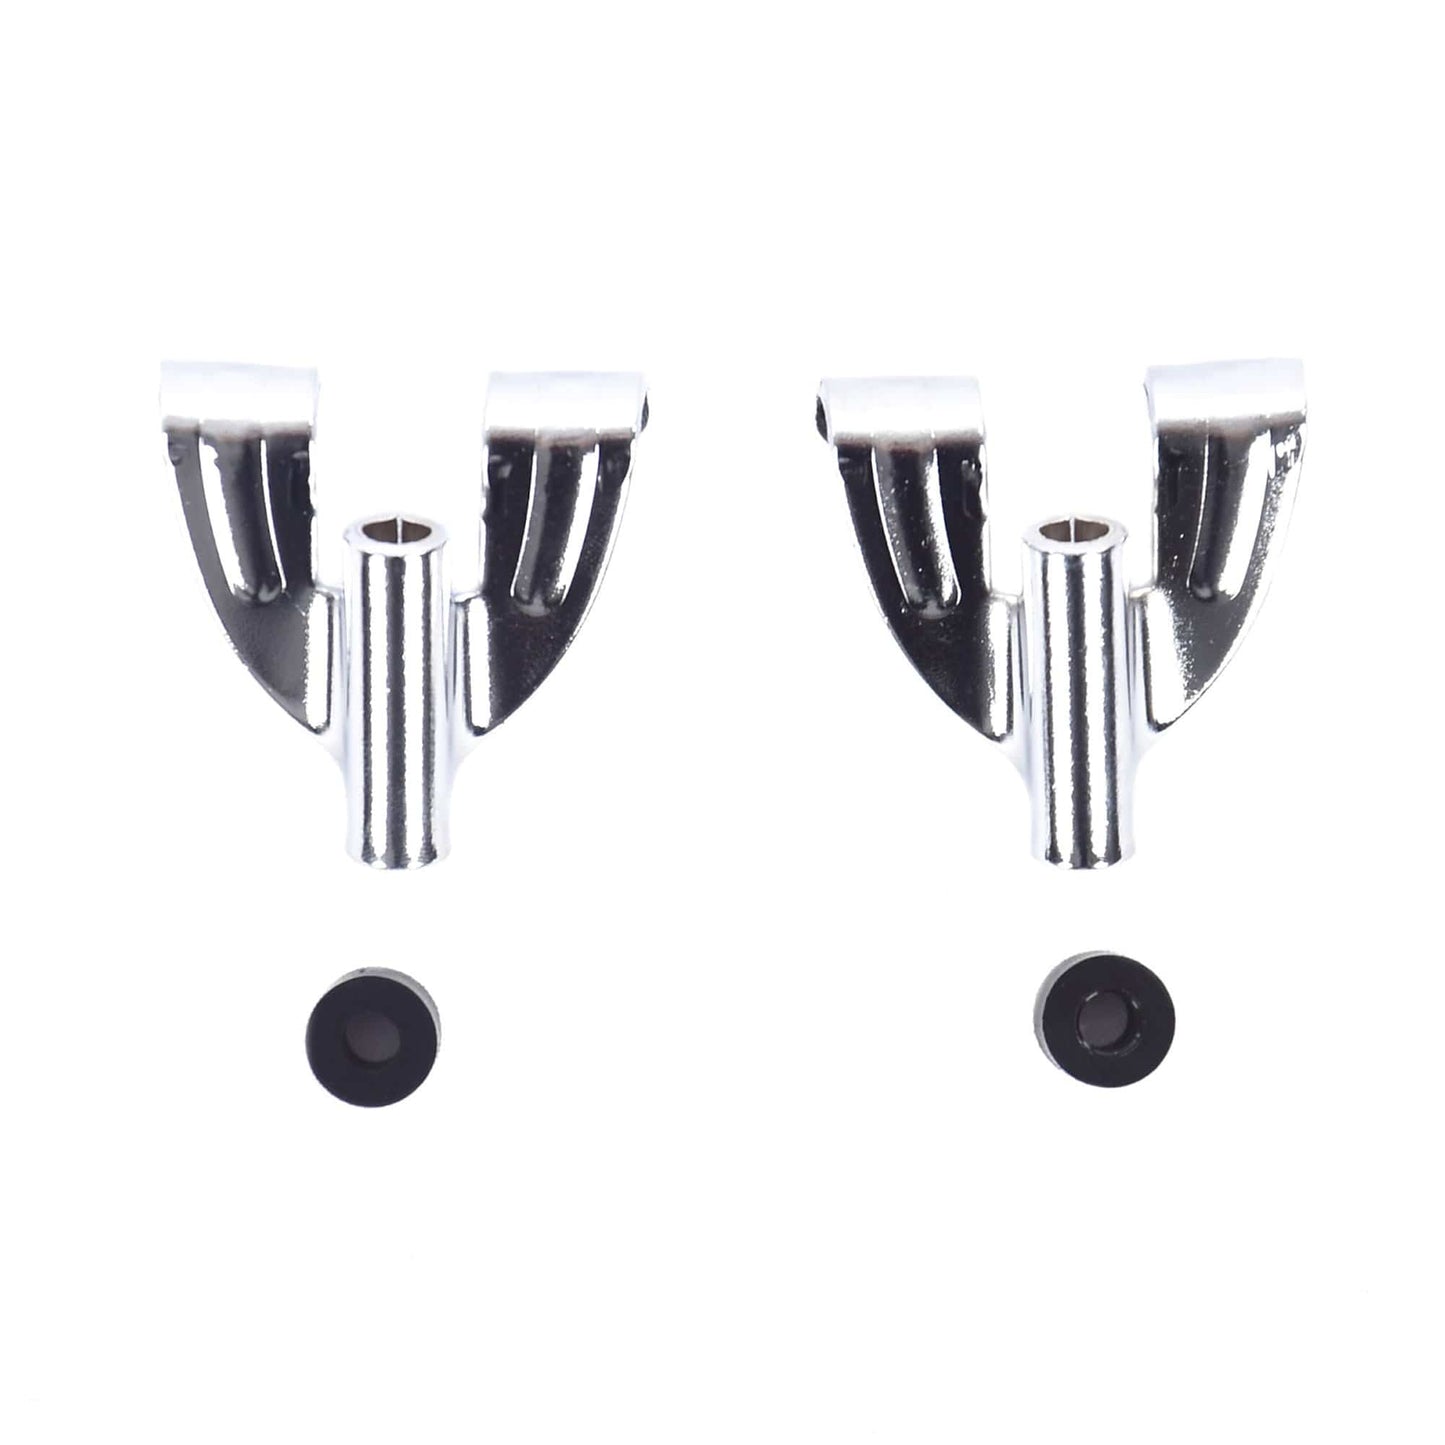 Ludwig Bass Drum Claw Hooks (4 Pack Bundle) Drums and Percussion / Parts and Accessories / Drum Parts